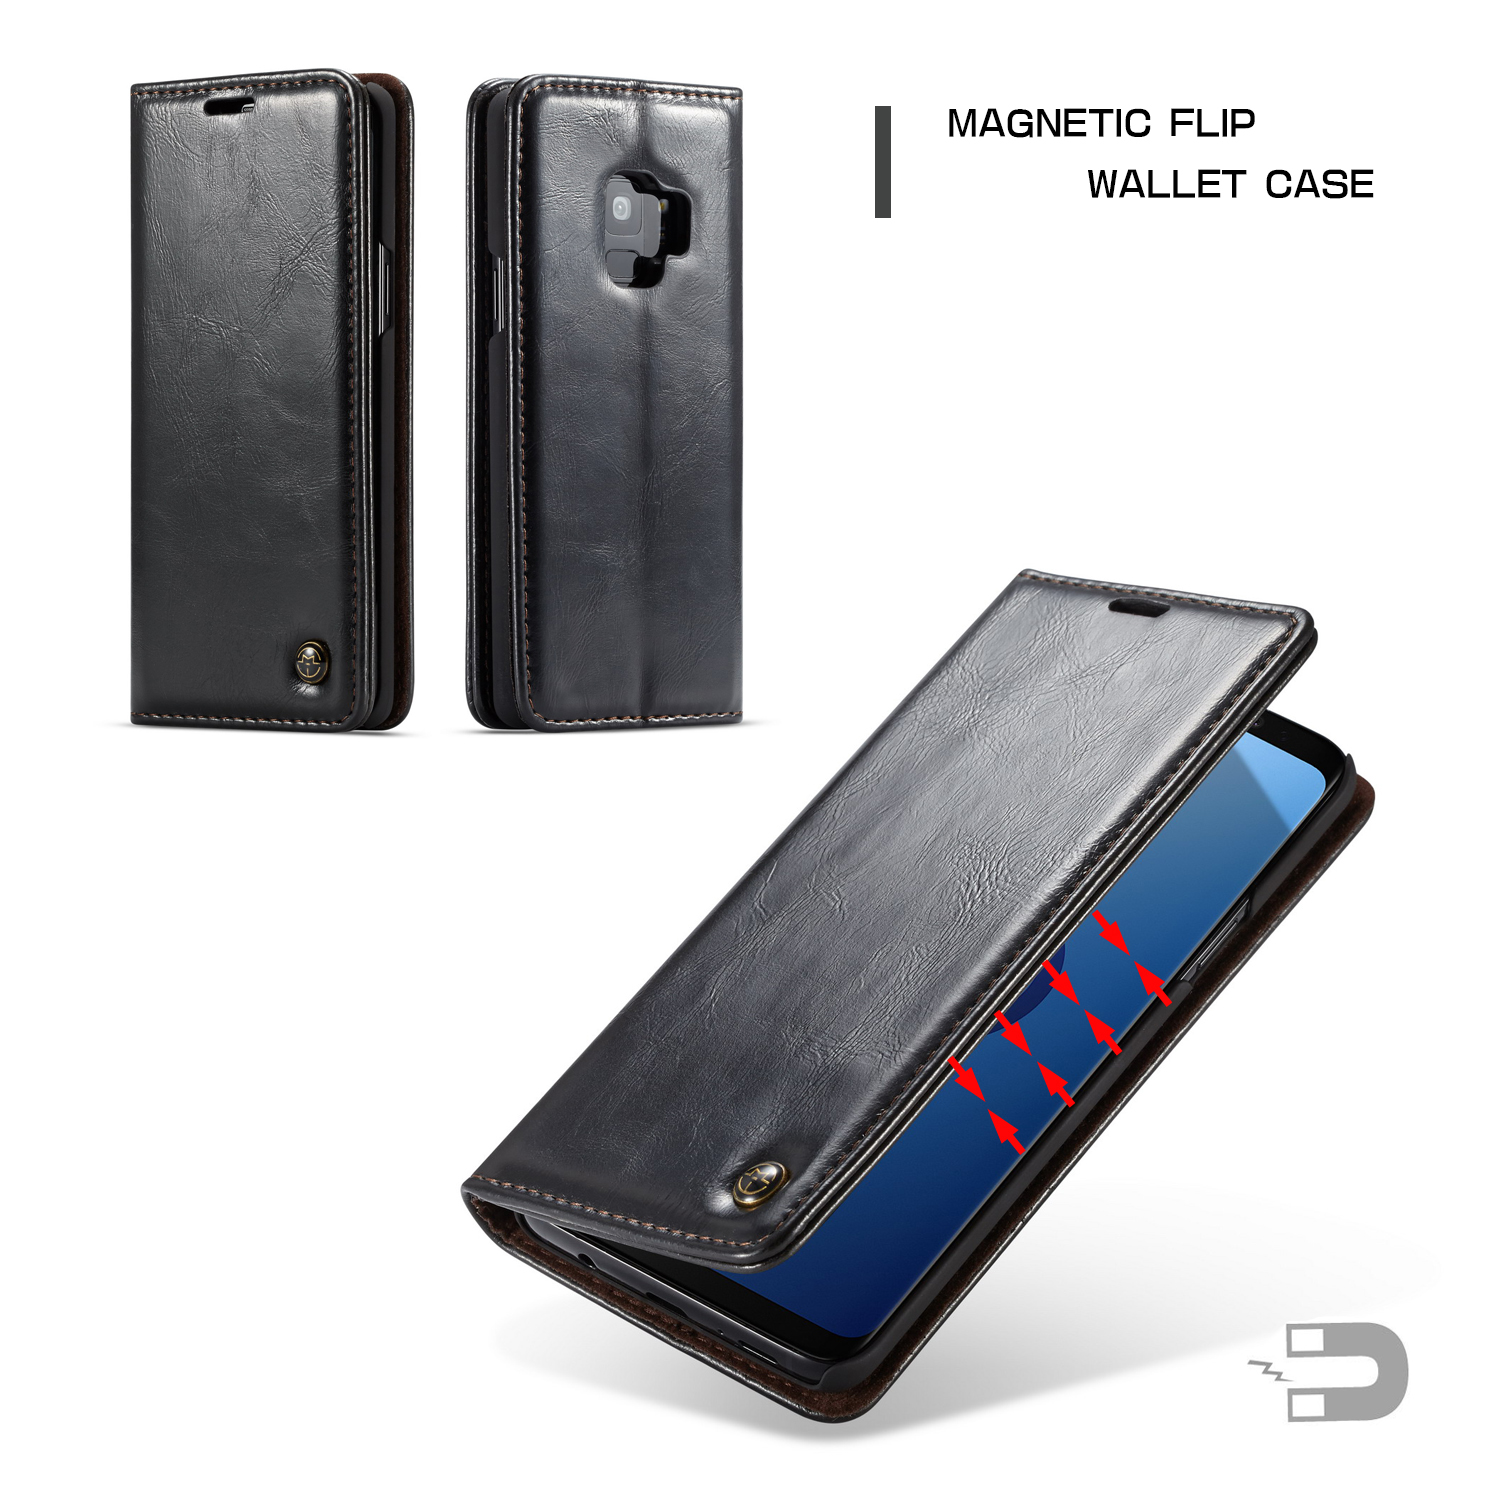 Caseme-Wallet-Kickstand-Protective-Case-For-Samsung-Galaxy-S9-Magnetic-Flip-Card-Slots-1291821-2